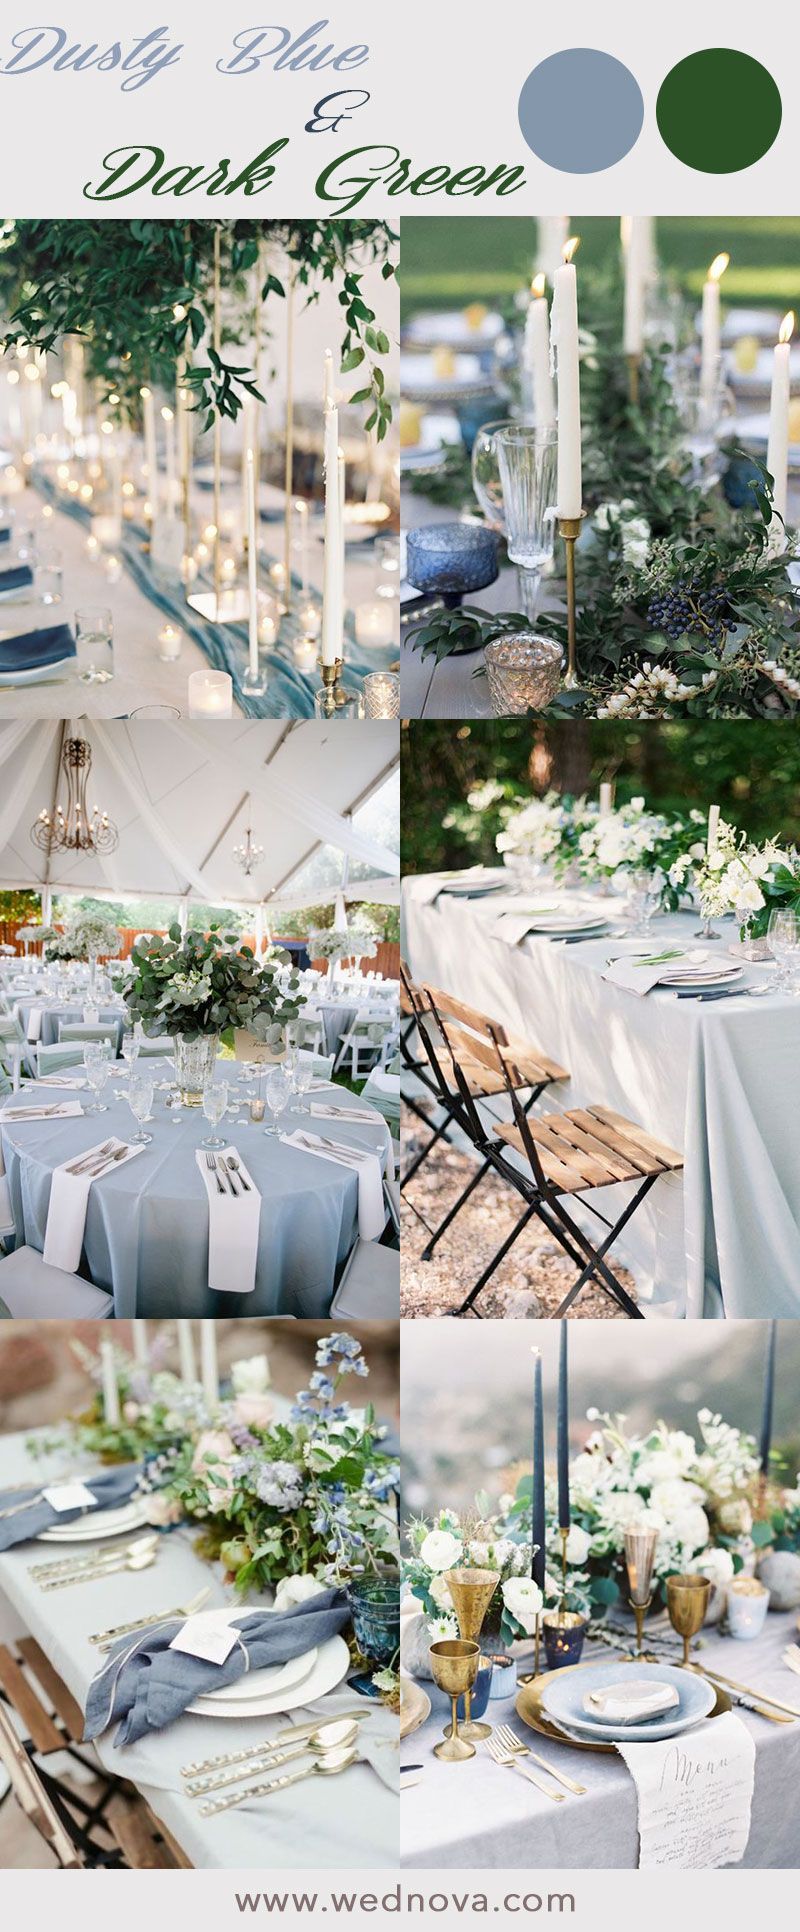 36+ AWESOME IDEAS TO HAVE A GREENERY-BASED WEDDING WITH DUSTY BLUE -   18 wedding theme ideas